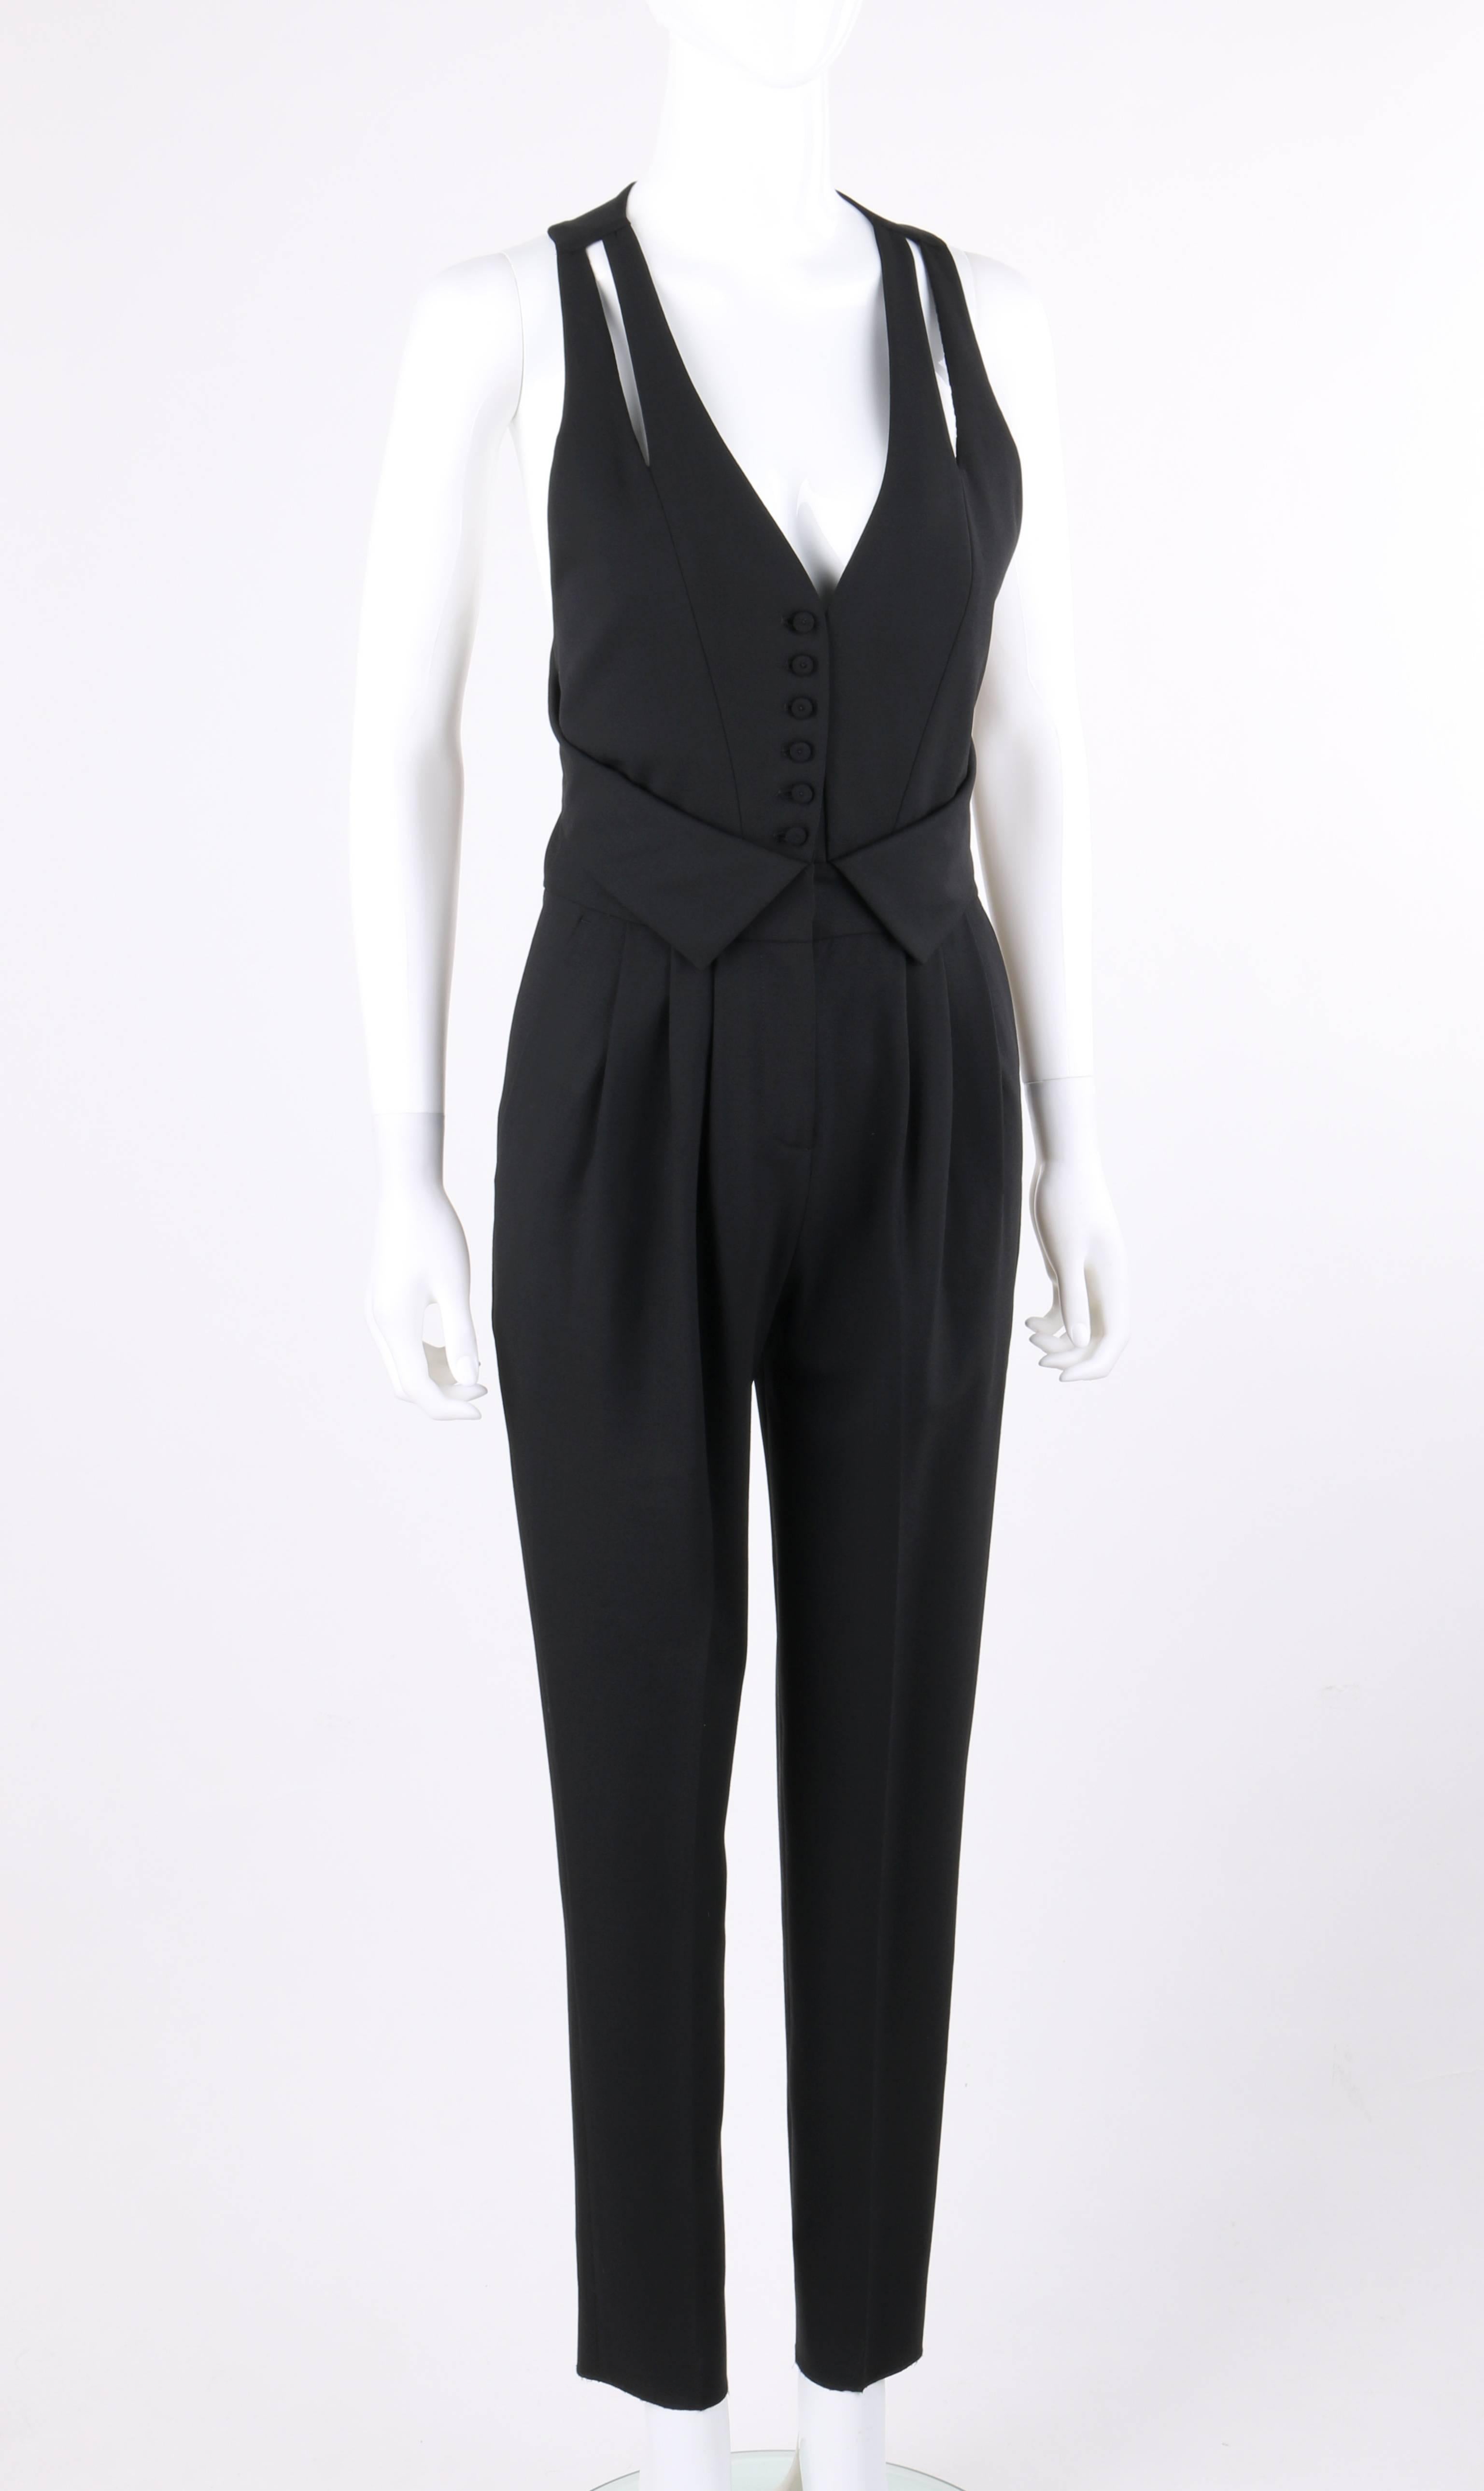 Fendi Resort 2009 black wool sleeveless tapered pant tuxedo jumpsuit. Same jumpsuit worn by Diane Kruger for the 2009 Hamilton Behind the Camera Awards. Sleeveless with cut-work detail at either side of front. Deep v-neckline. Five center front